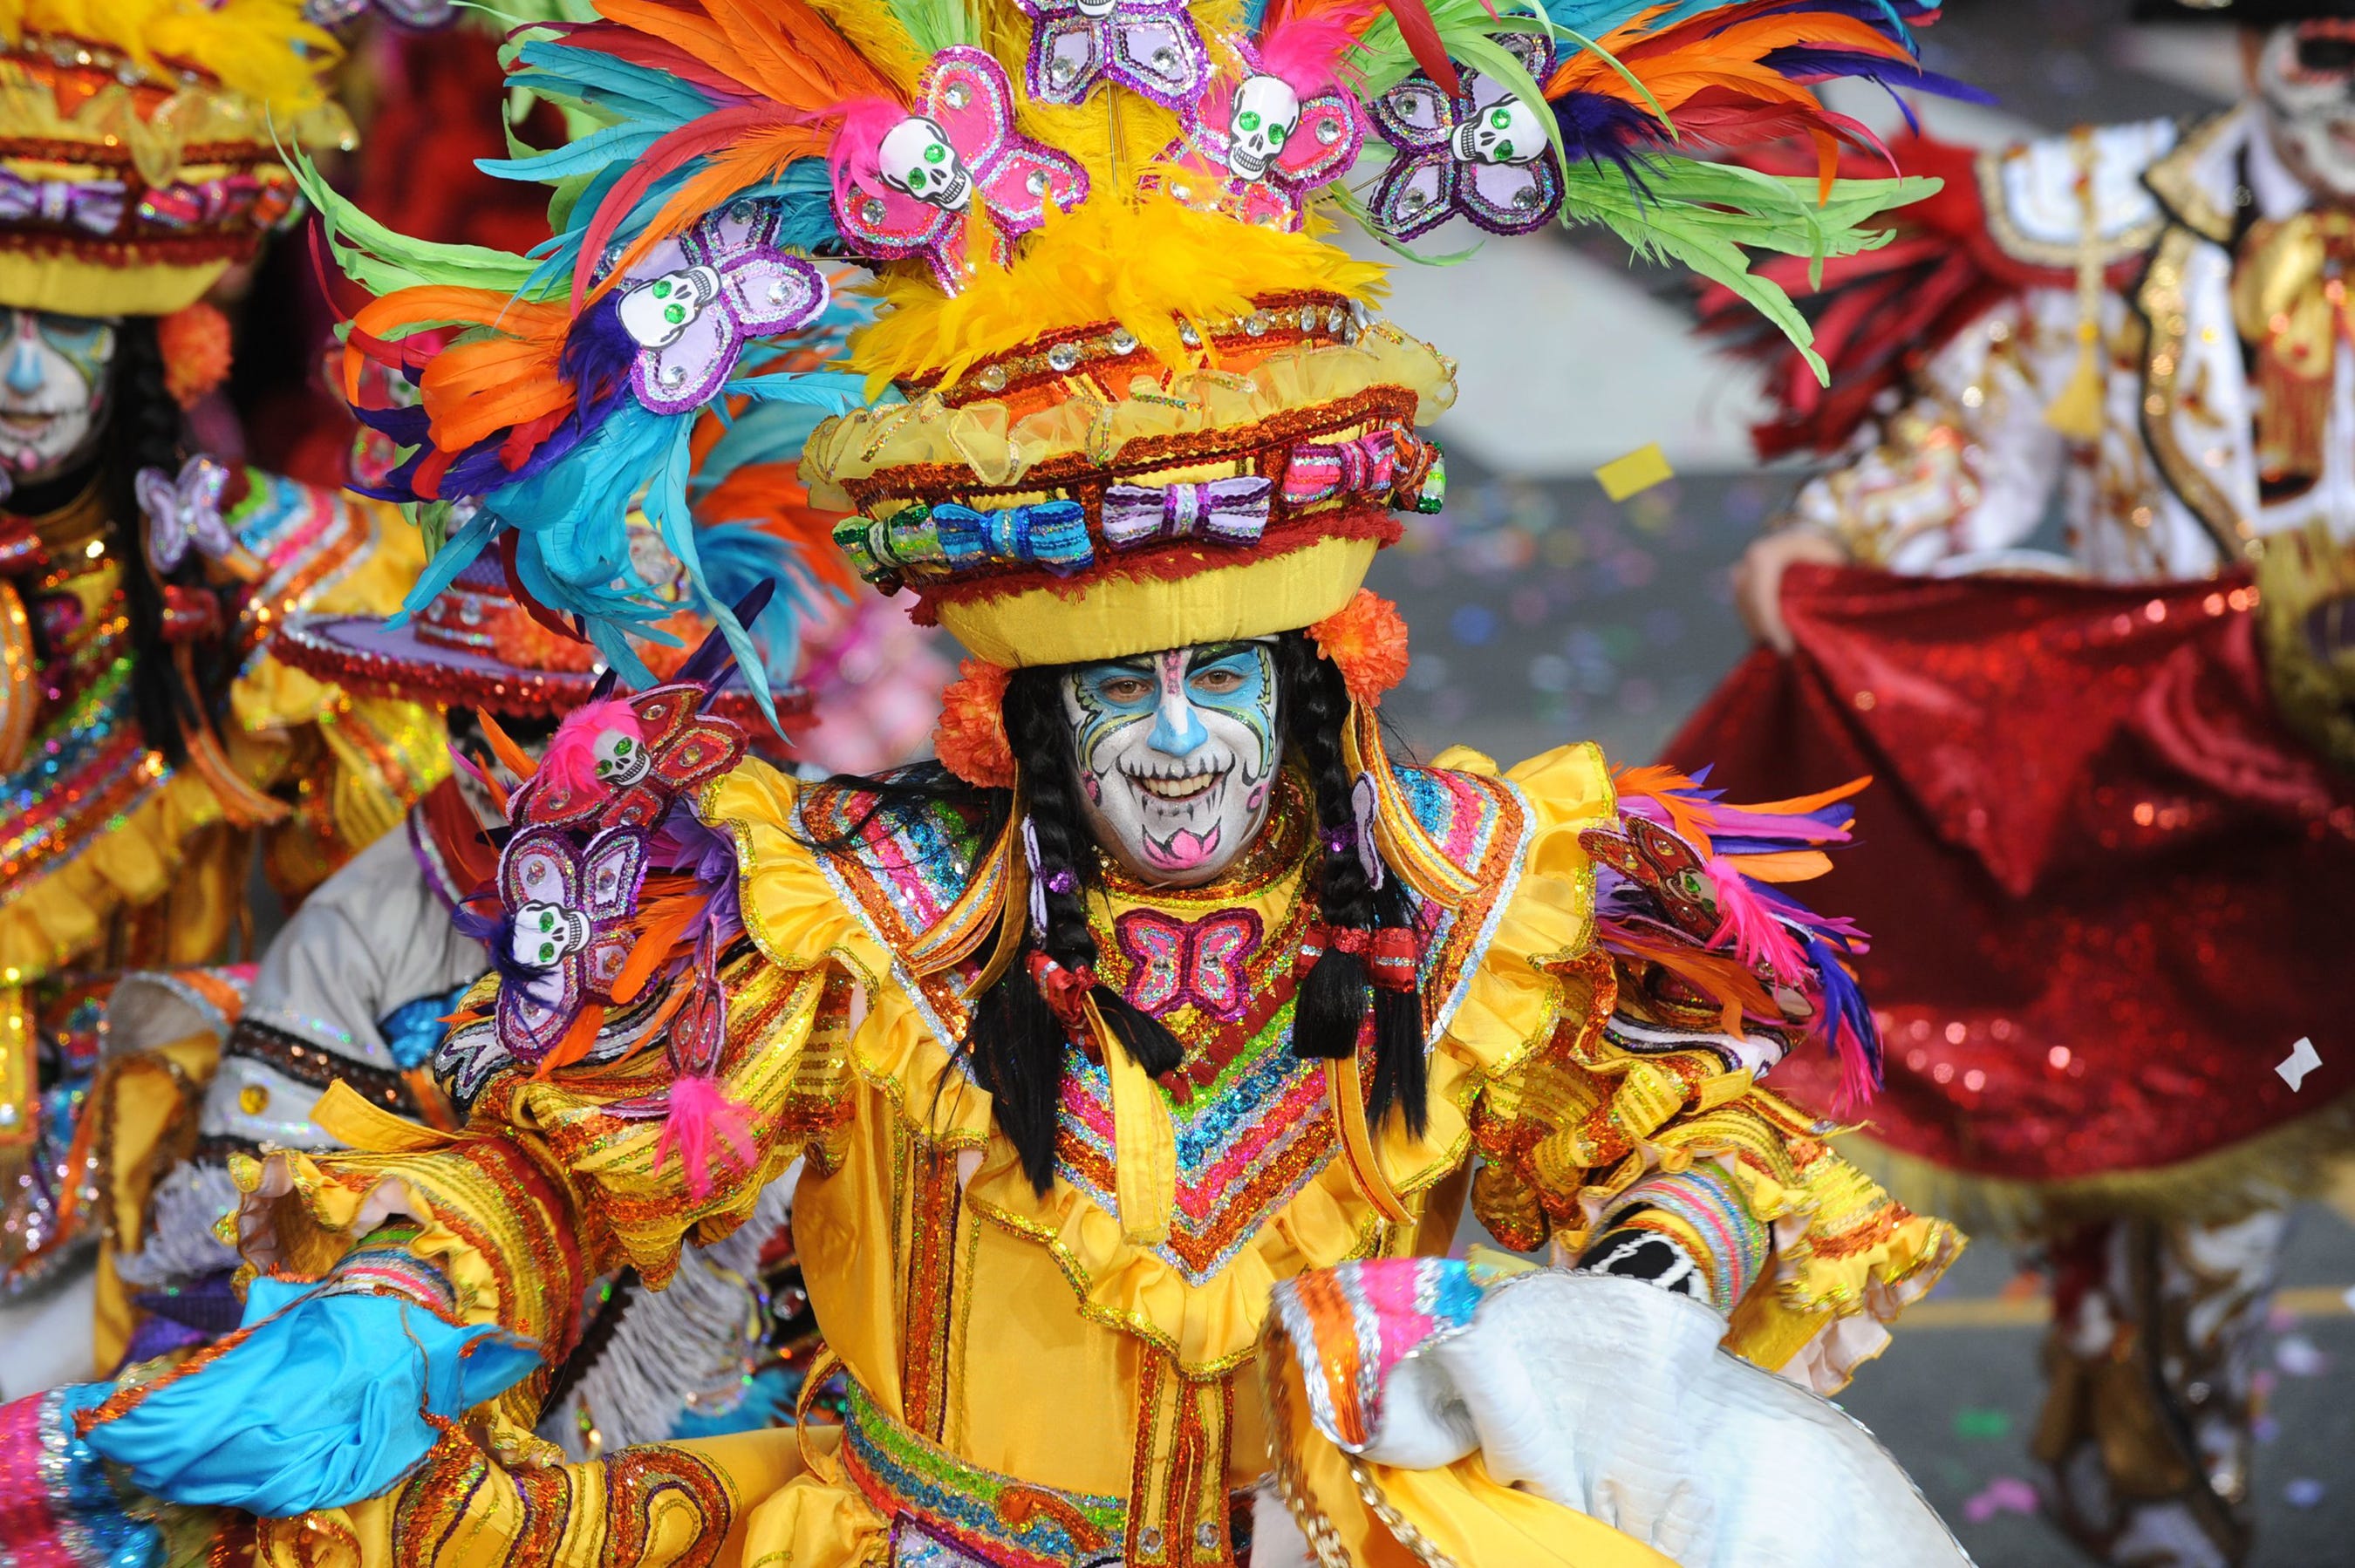 Mummers Schedule 2022 Rainy Forecast Delays Mummers Parade, Cancels Fireworks